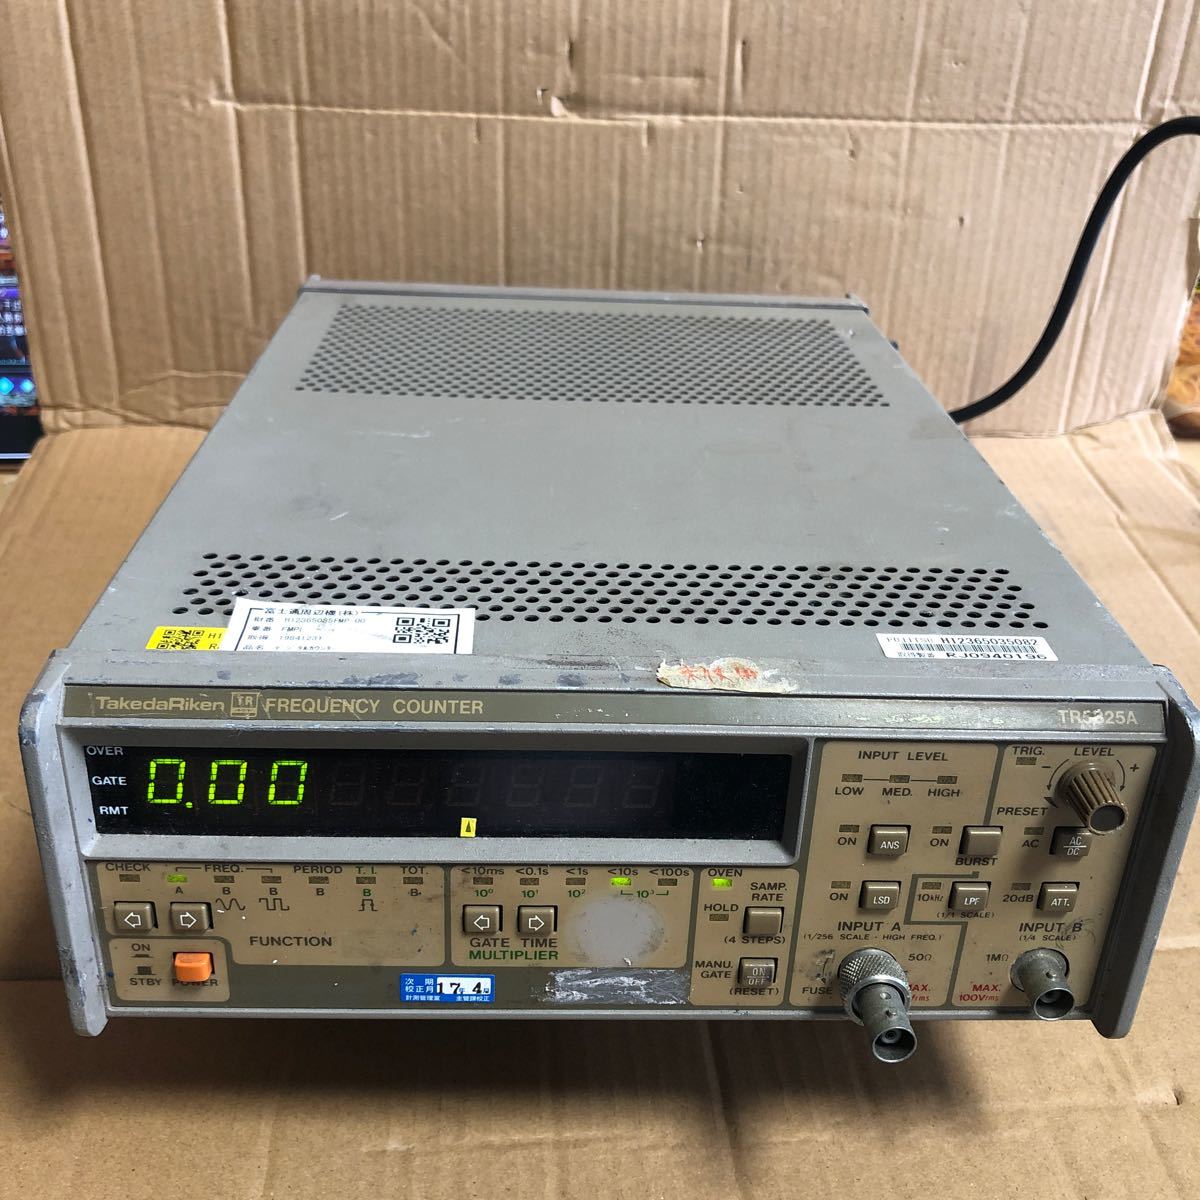 (7-2)ADVANTEST アドバンテスト FREQUENCY COUNTER 周波数カウンター TR5825A